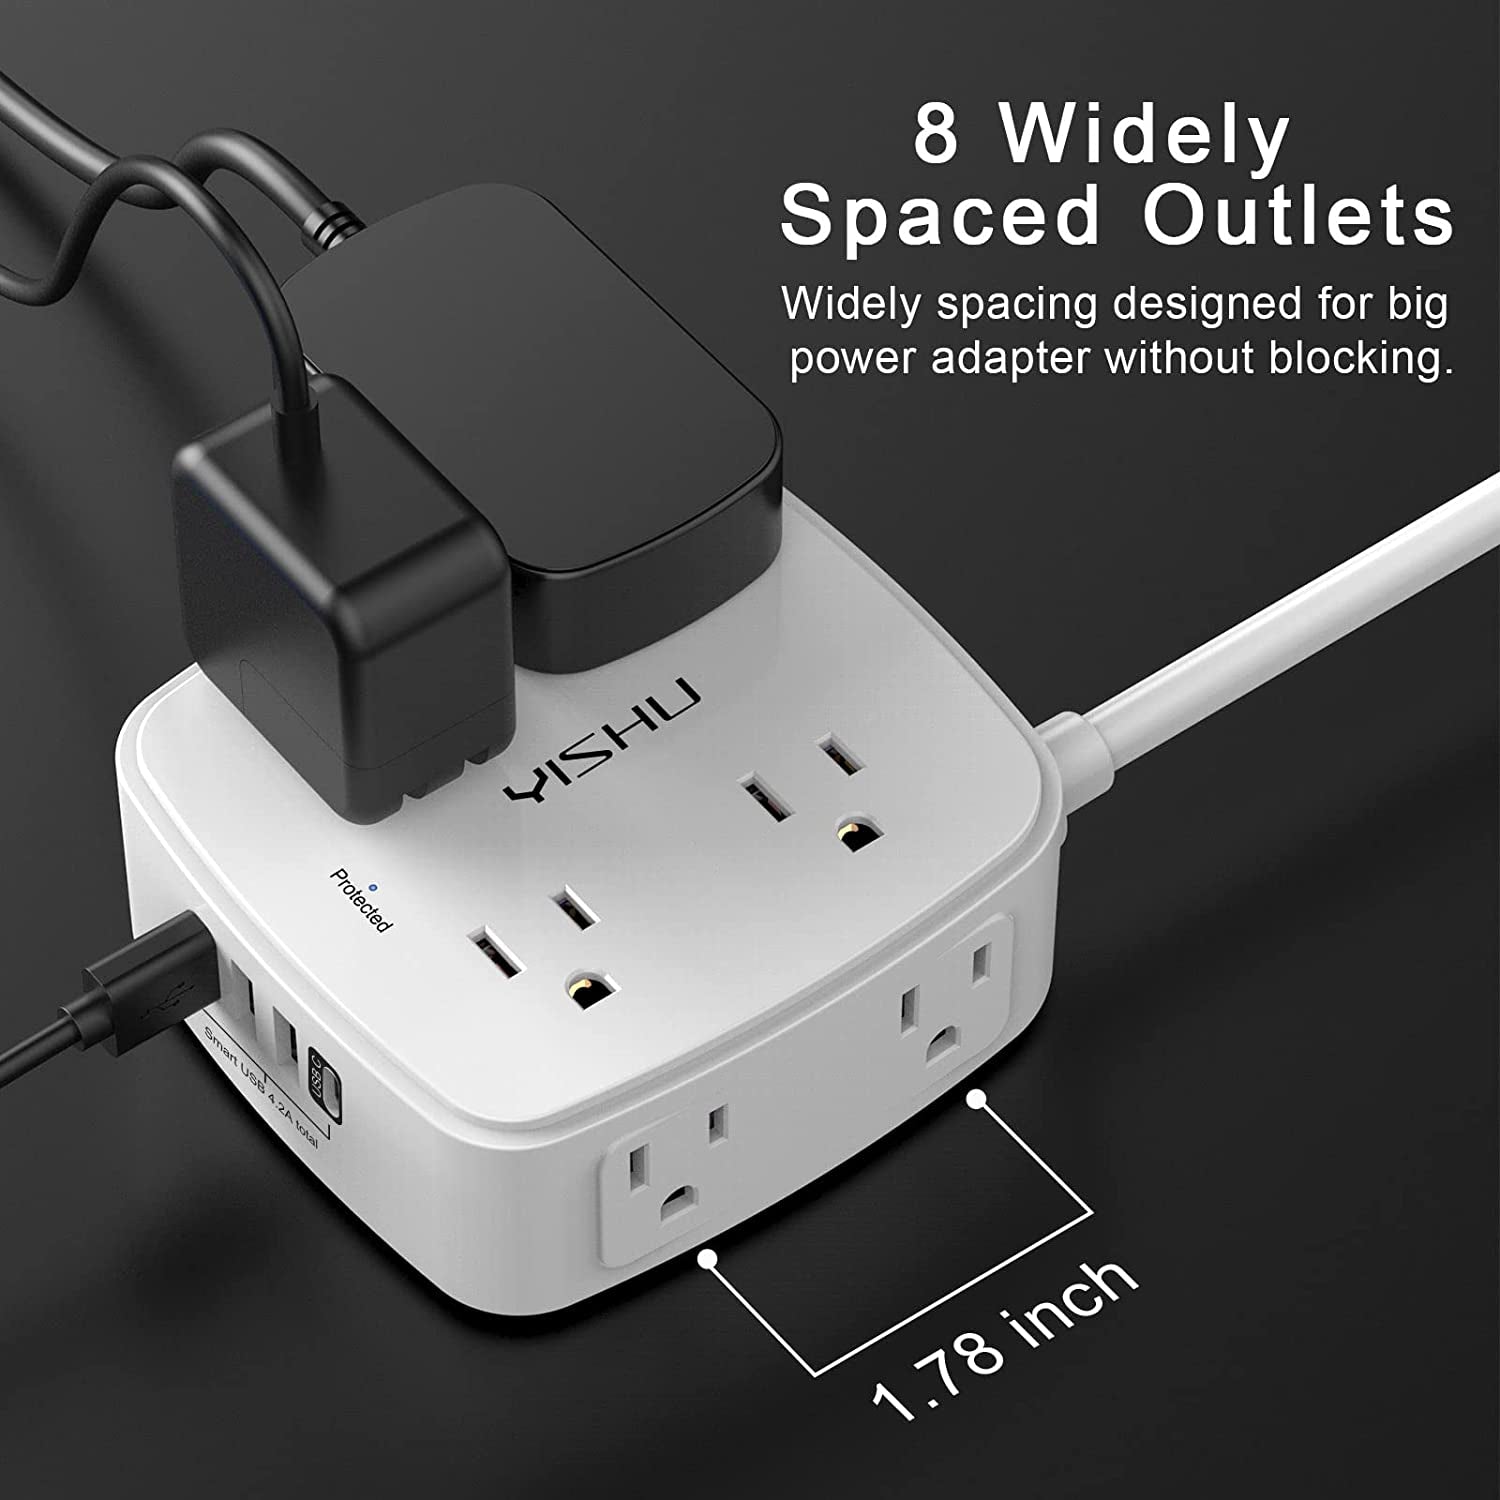 Power Strip Surge Protector - 8 Widely-Spaced Outlets with 4 USB Ports, 3-Sided Extension with 6ft Cord, Flat Plug, Wall-Mountable, Desk Charging Station, ETL Certified, White